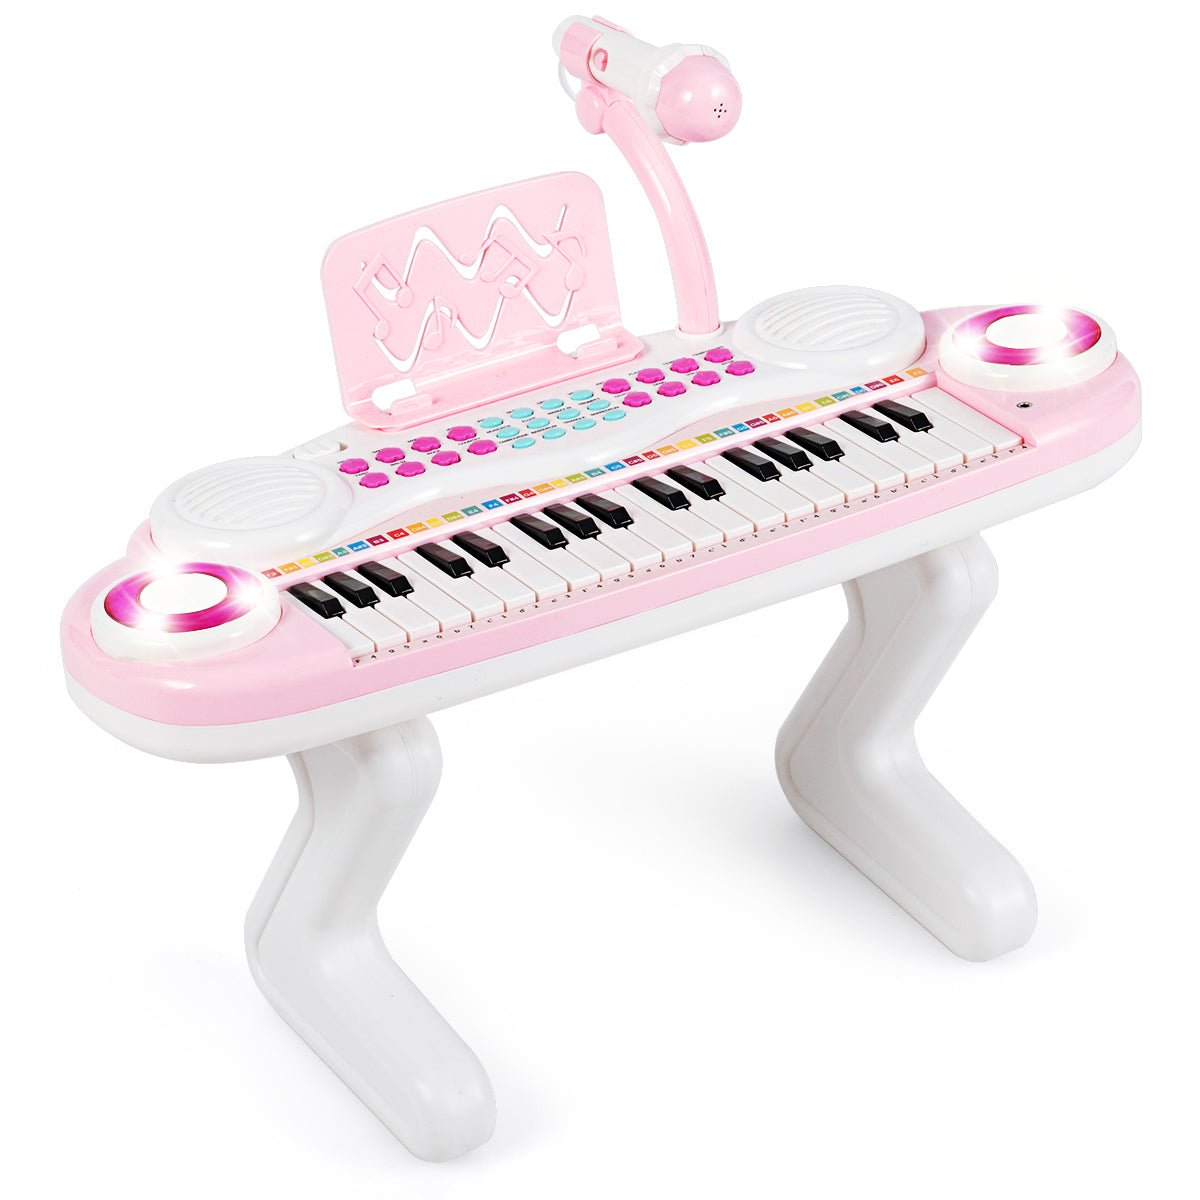 Shop the Pink Electronic Keyboard Piano with Microphone for Kids